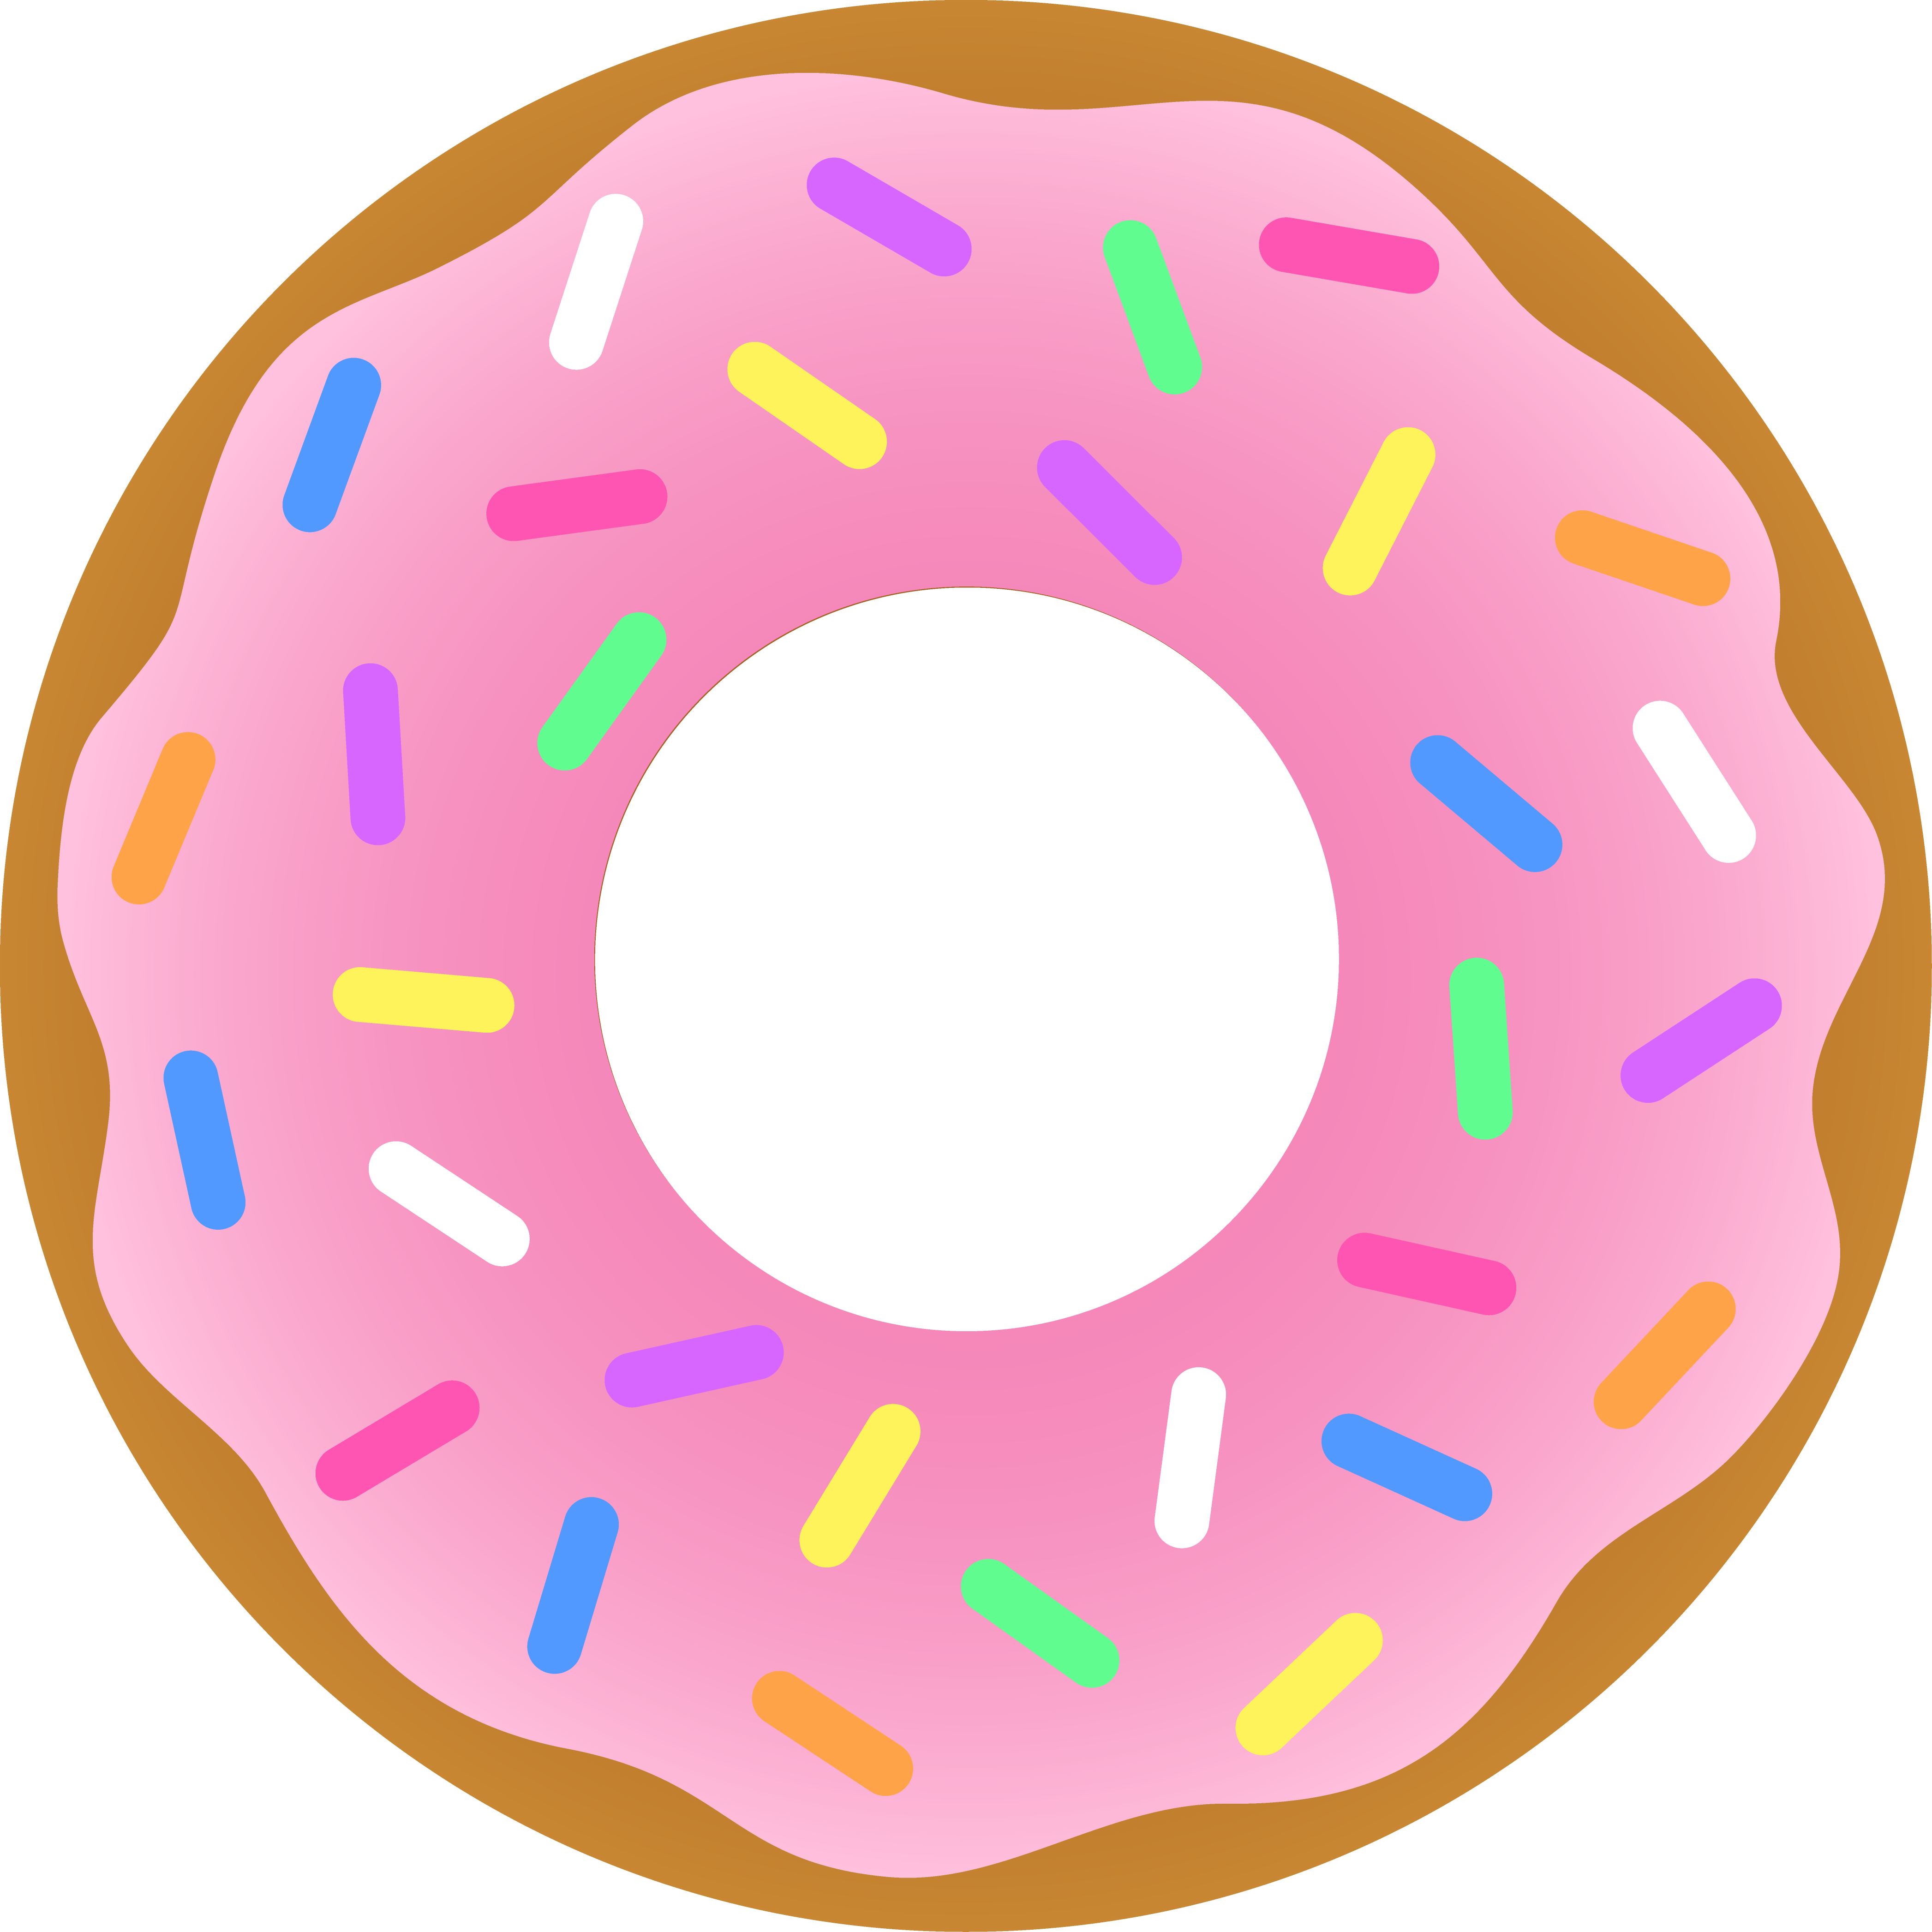 Donuts clipart free public domain. Coffee and tasty image